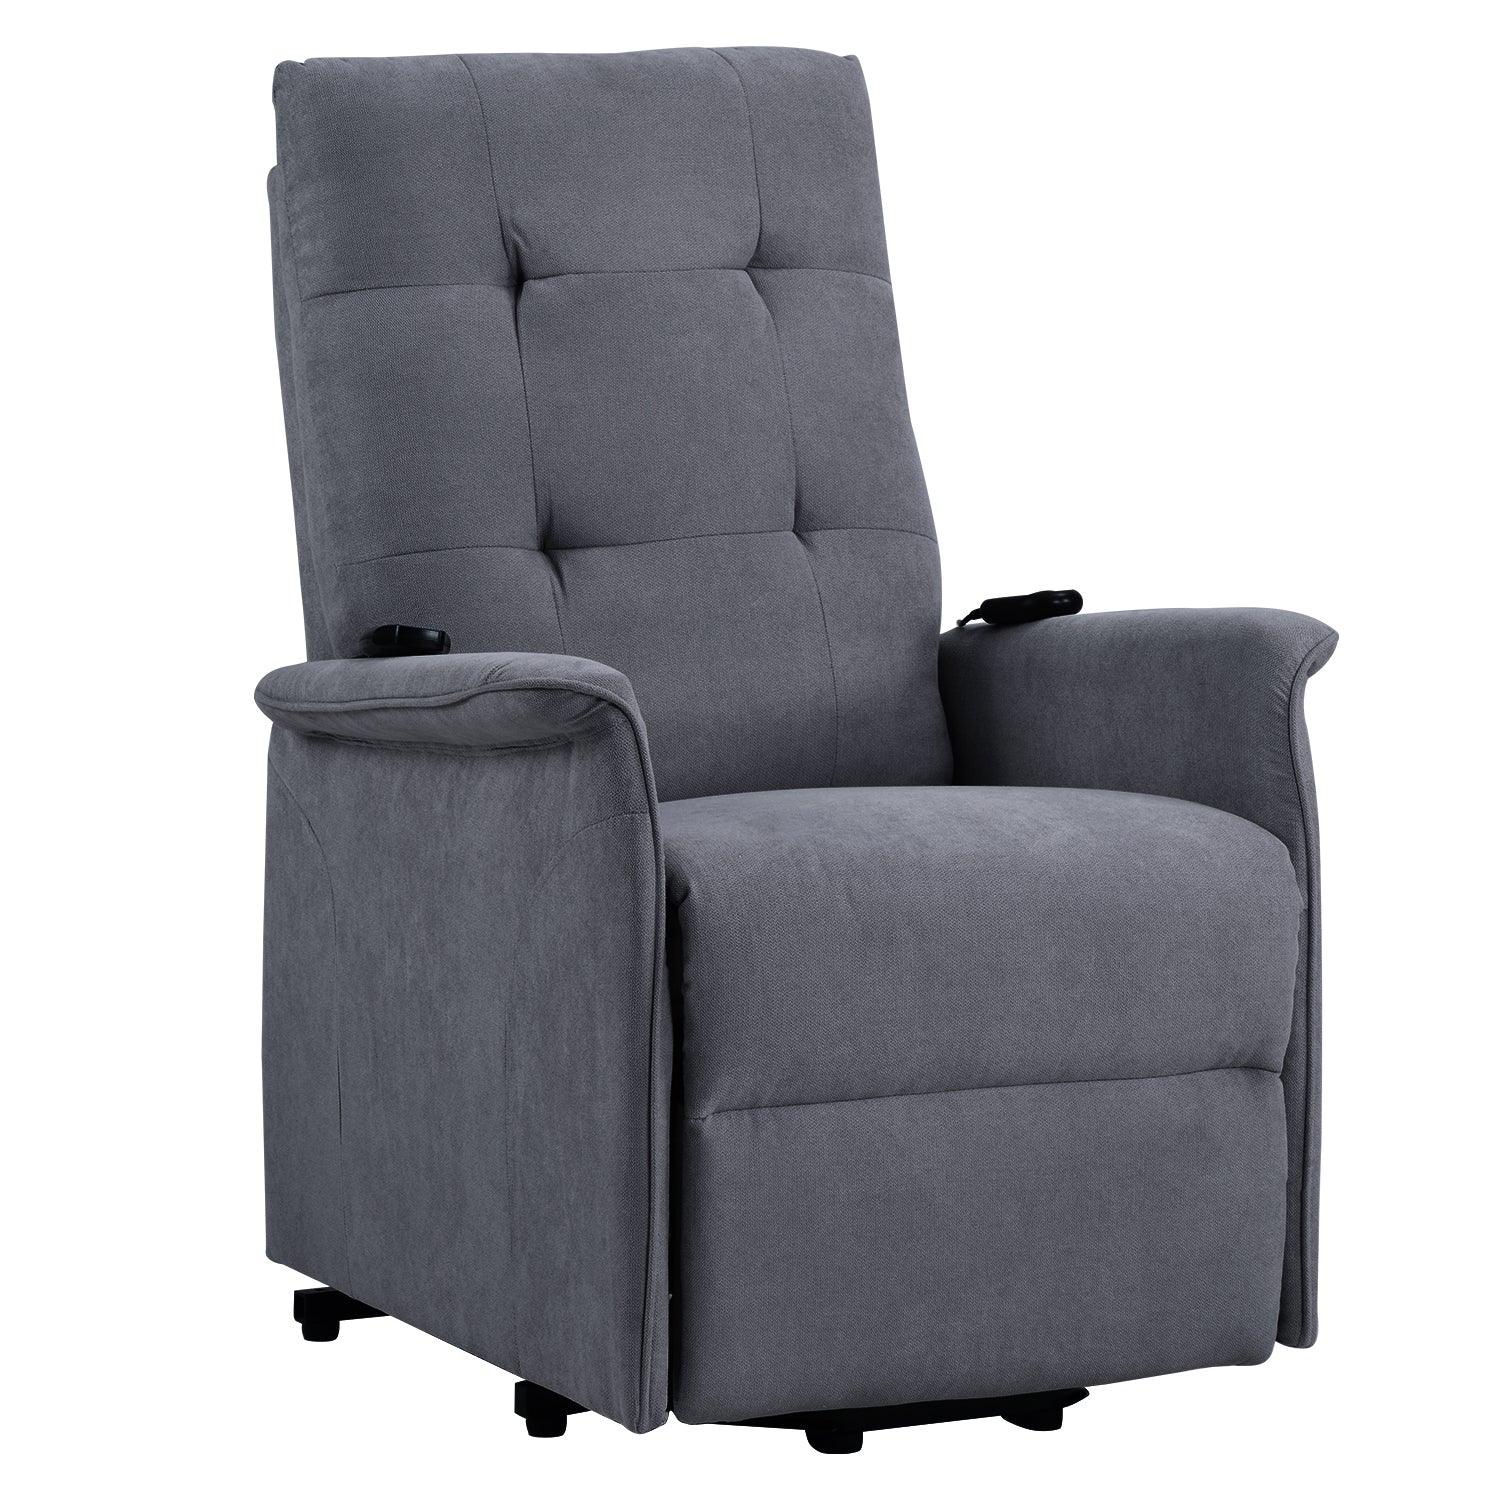 Power Lift Chair for the Adjustable Massage Function and Reclining Feature, Dark Grey FredCo